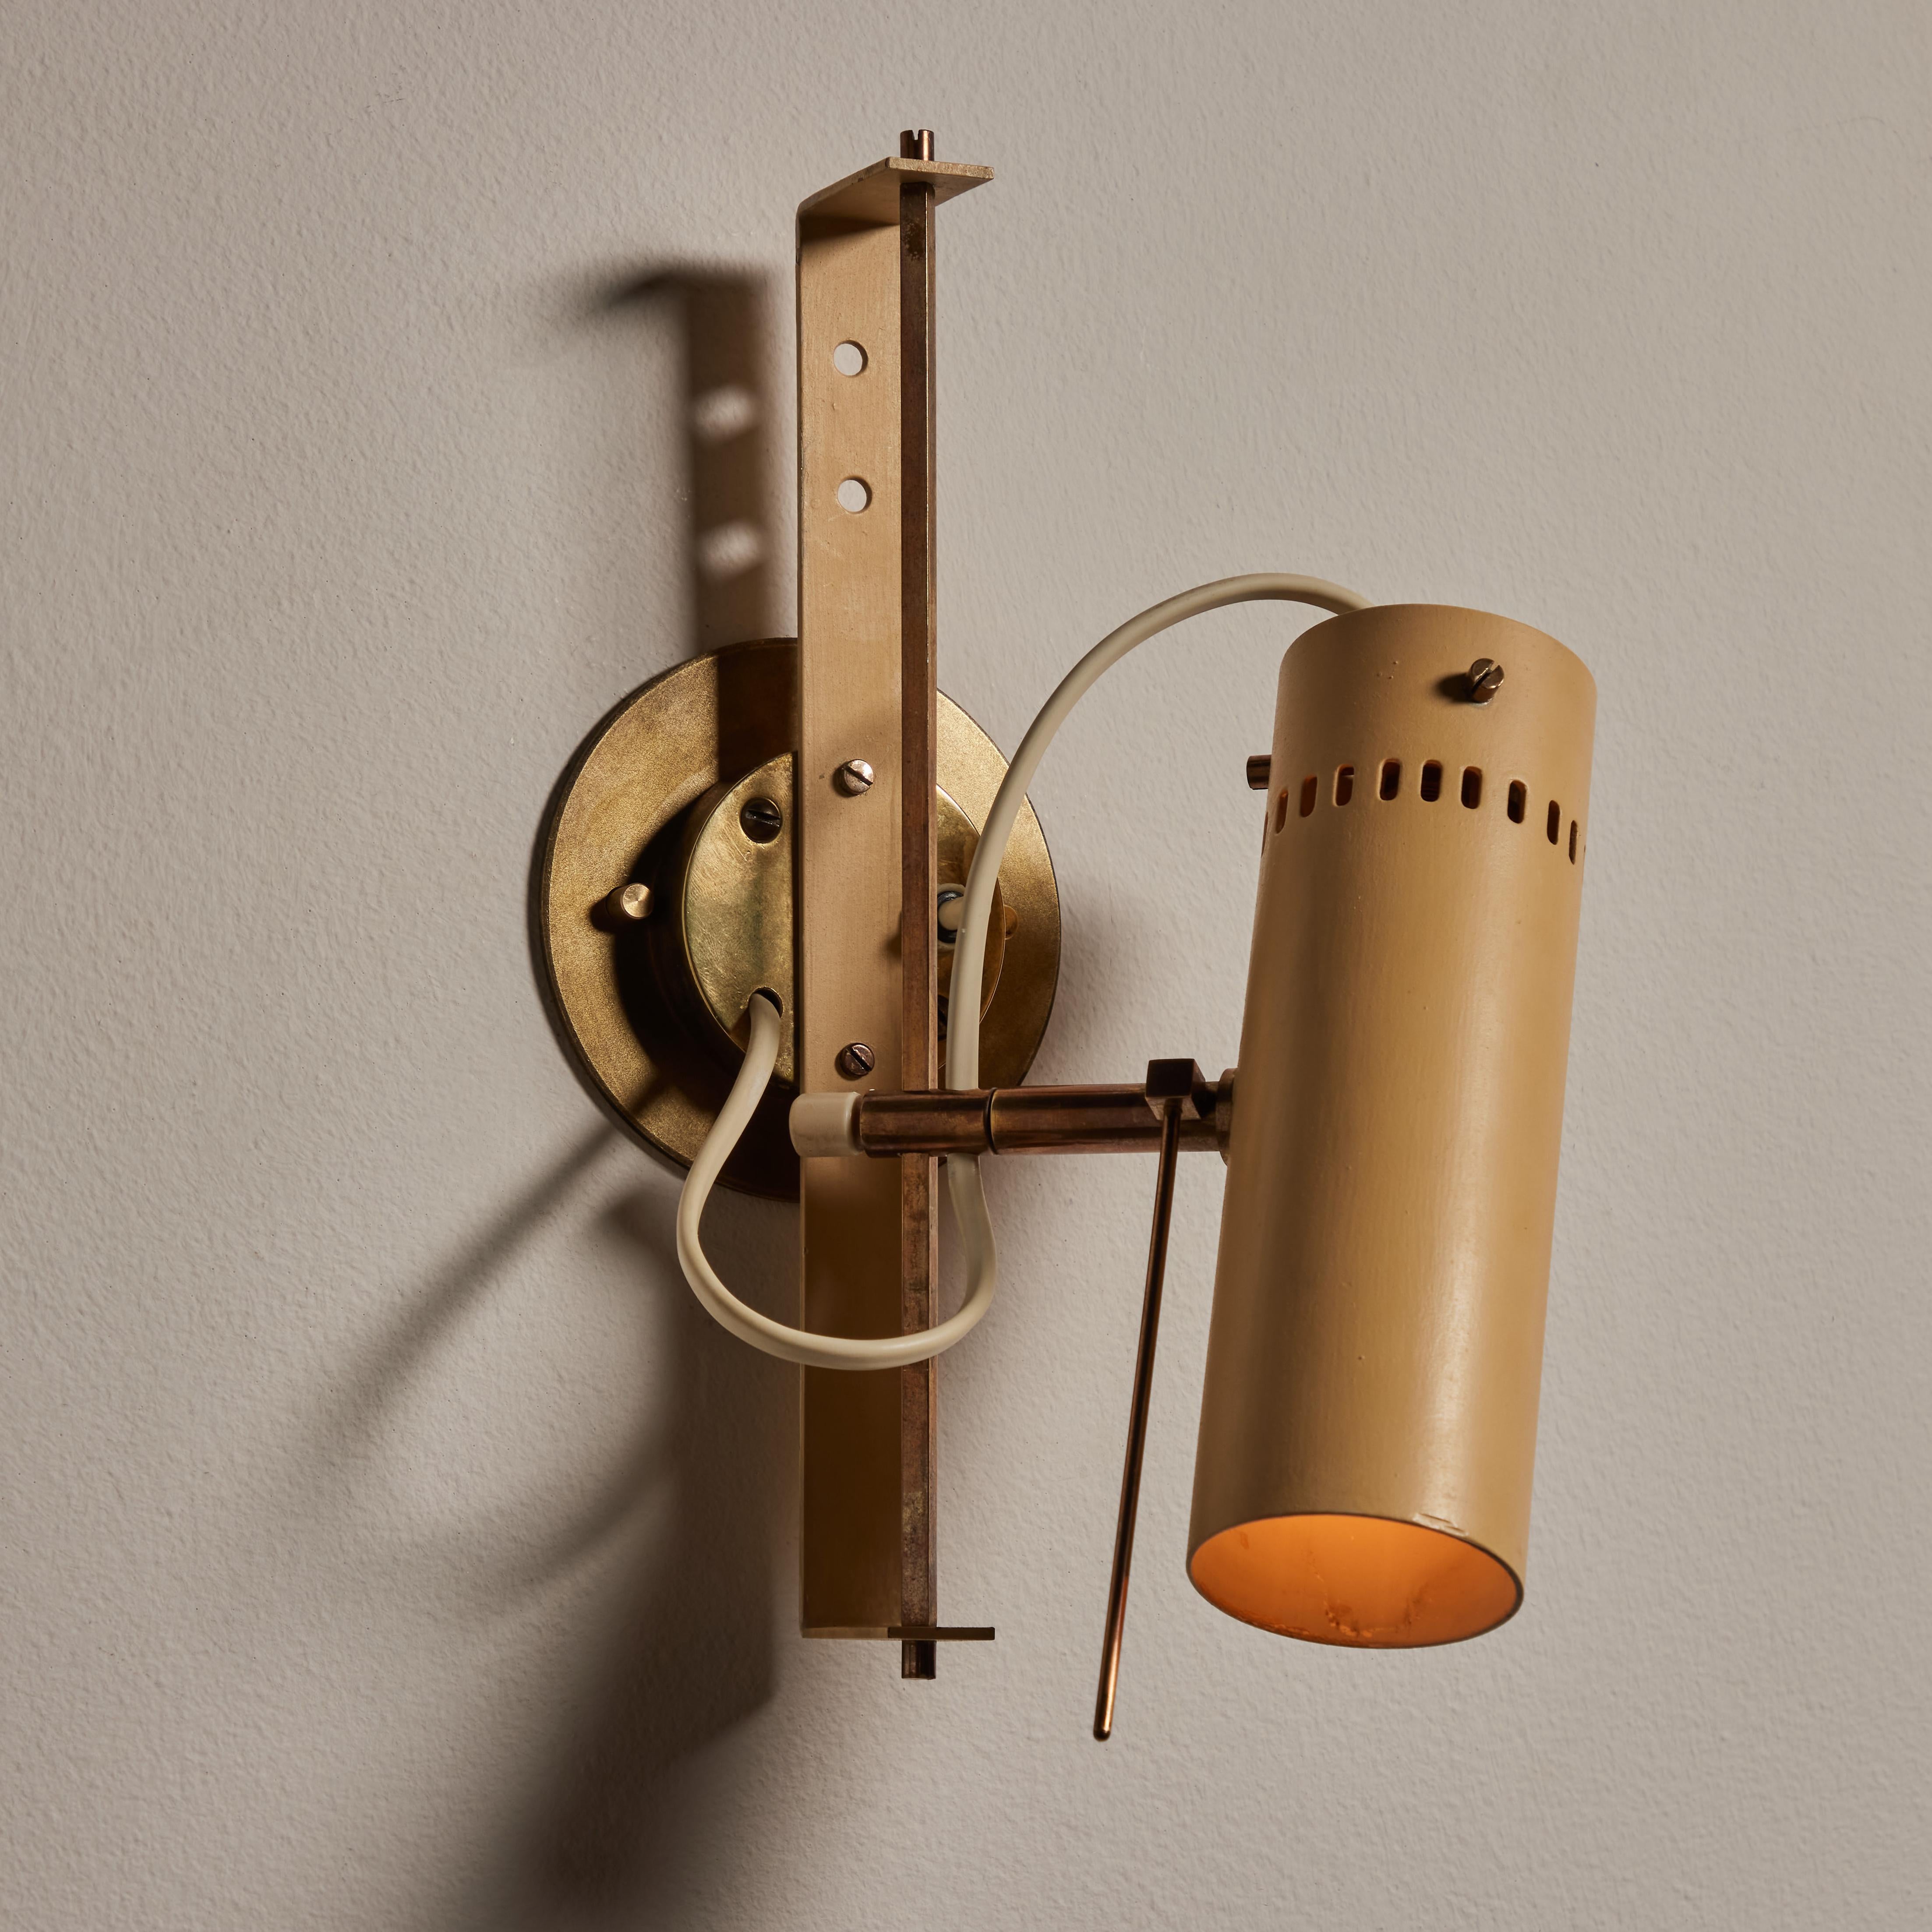 Rare Model No. 174 wall light by Tito Agnoli for Oluce. Designed and manufactured in Italy, circa 1950's. Brass, painted metal. Wired for U.S. standards. Adjust to various positions and heights. We recommend one E14 40w maximum bulb. Bulb not